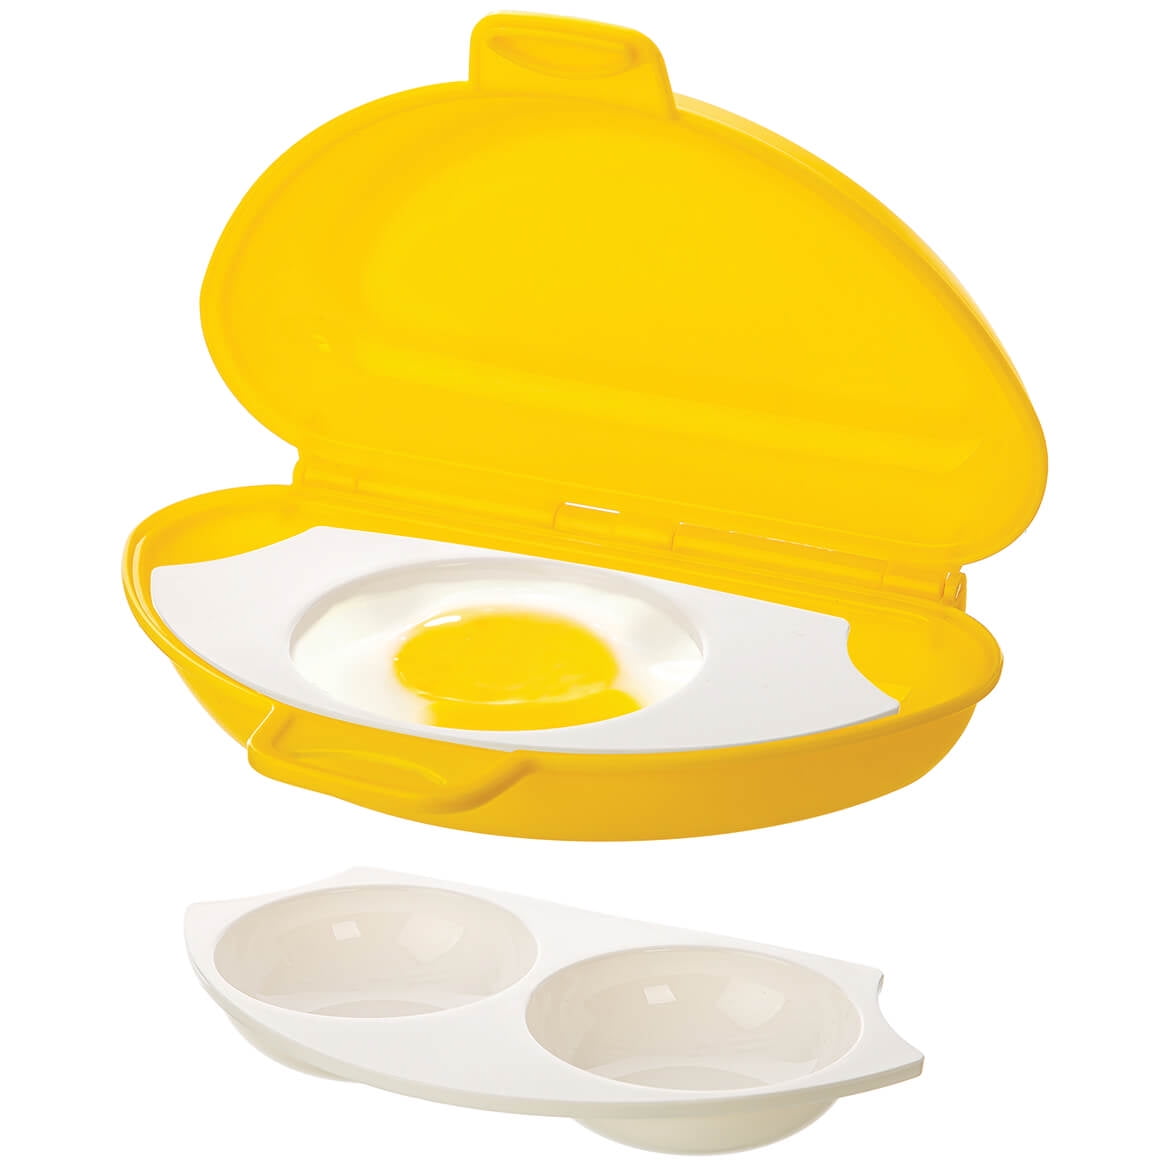 Nordic Ware 2 Cavity Egg Poacher Kitchen Cooking Gadget Review 